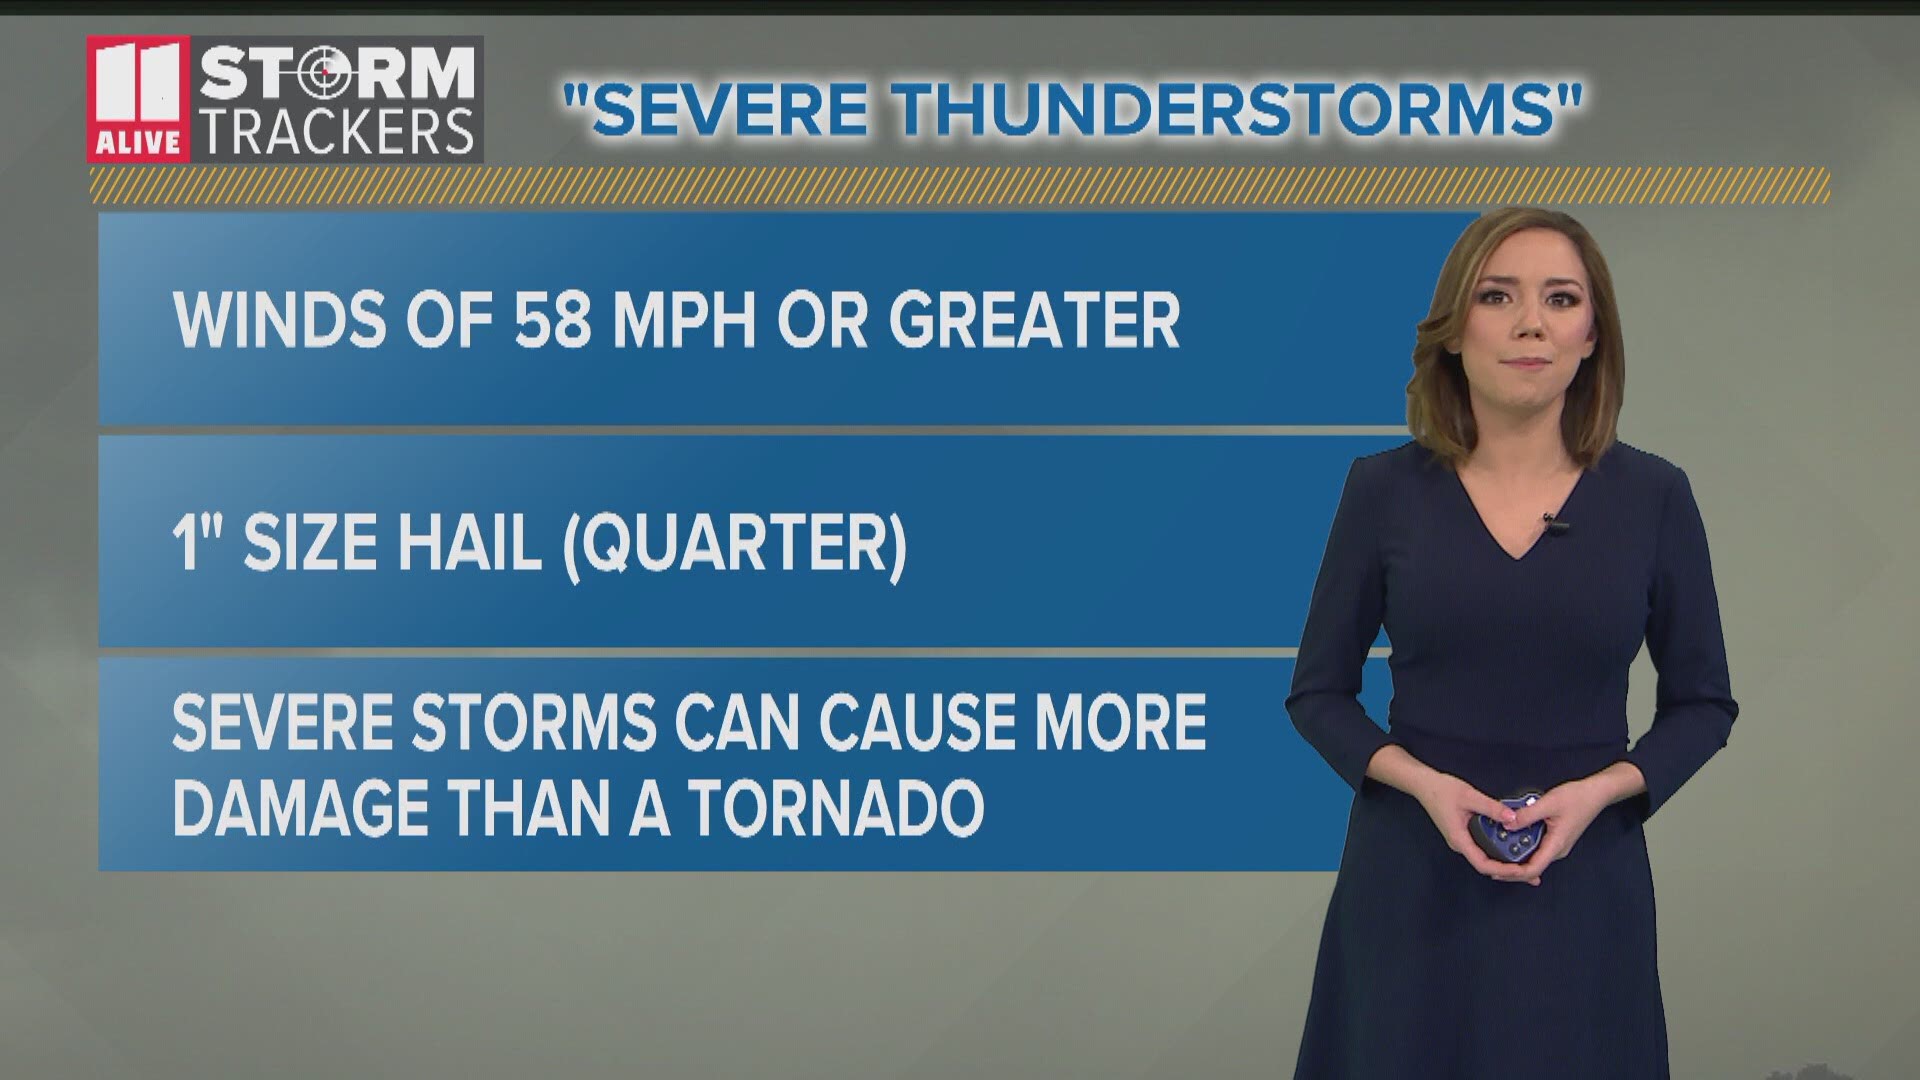 Here's what it means to be in a severe thunderstorm watch vs warning and how to stay safe.